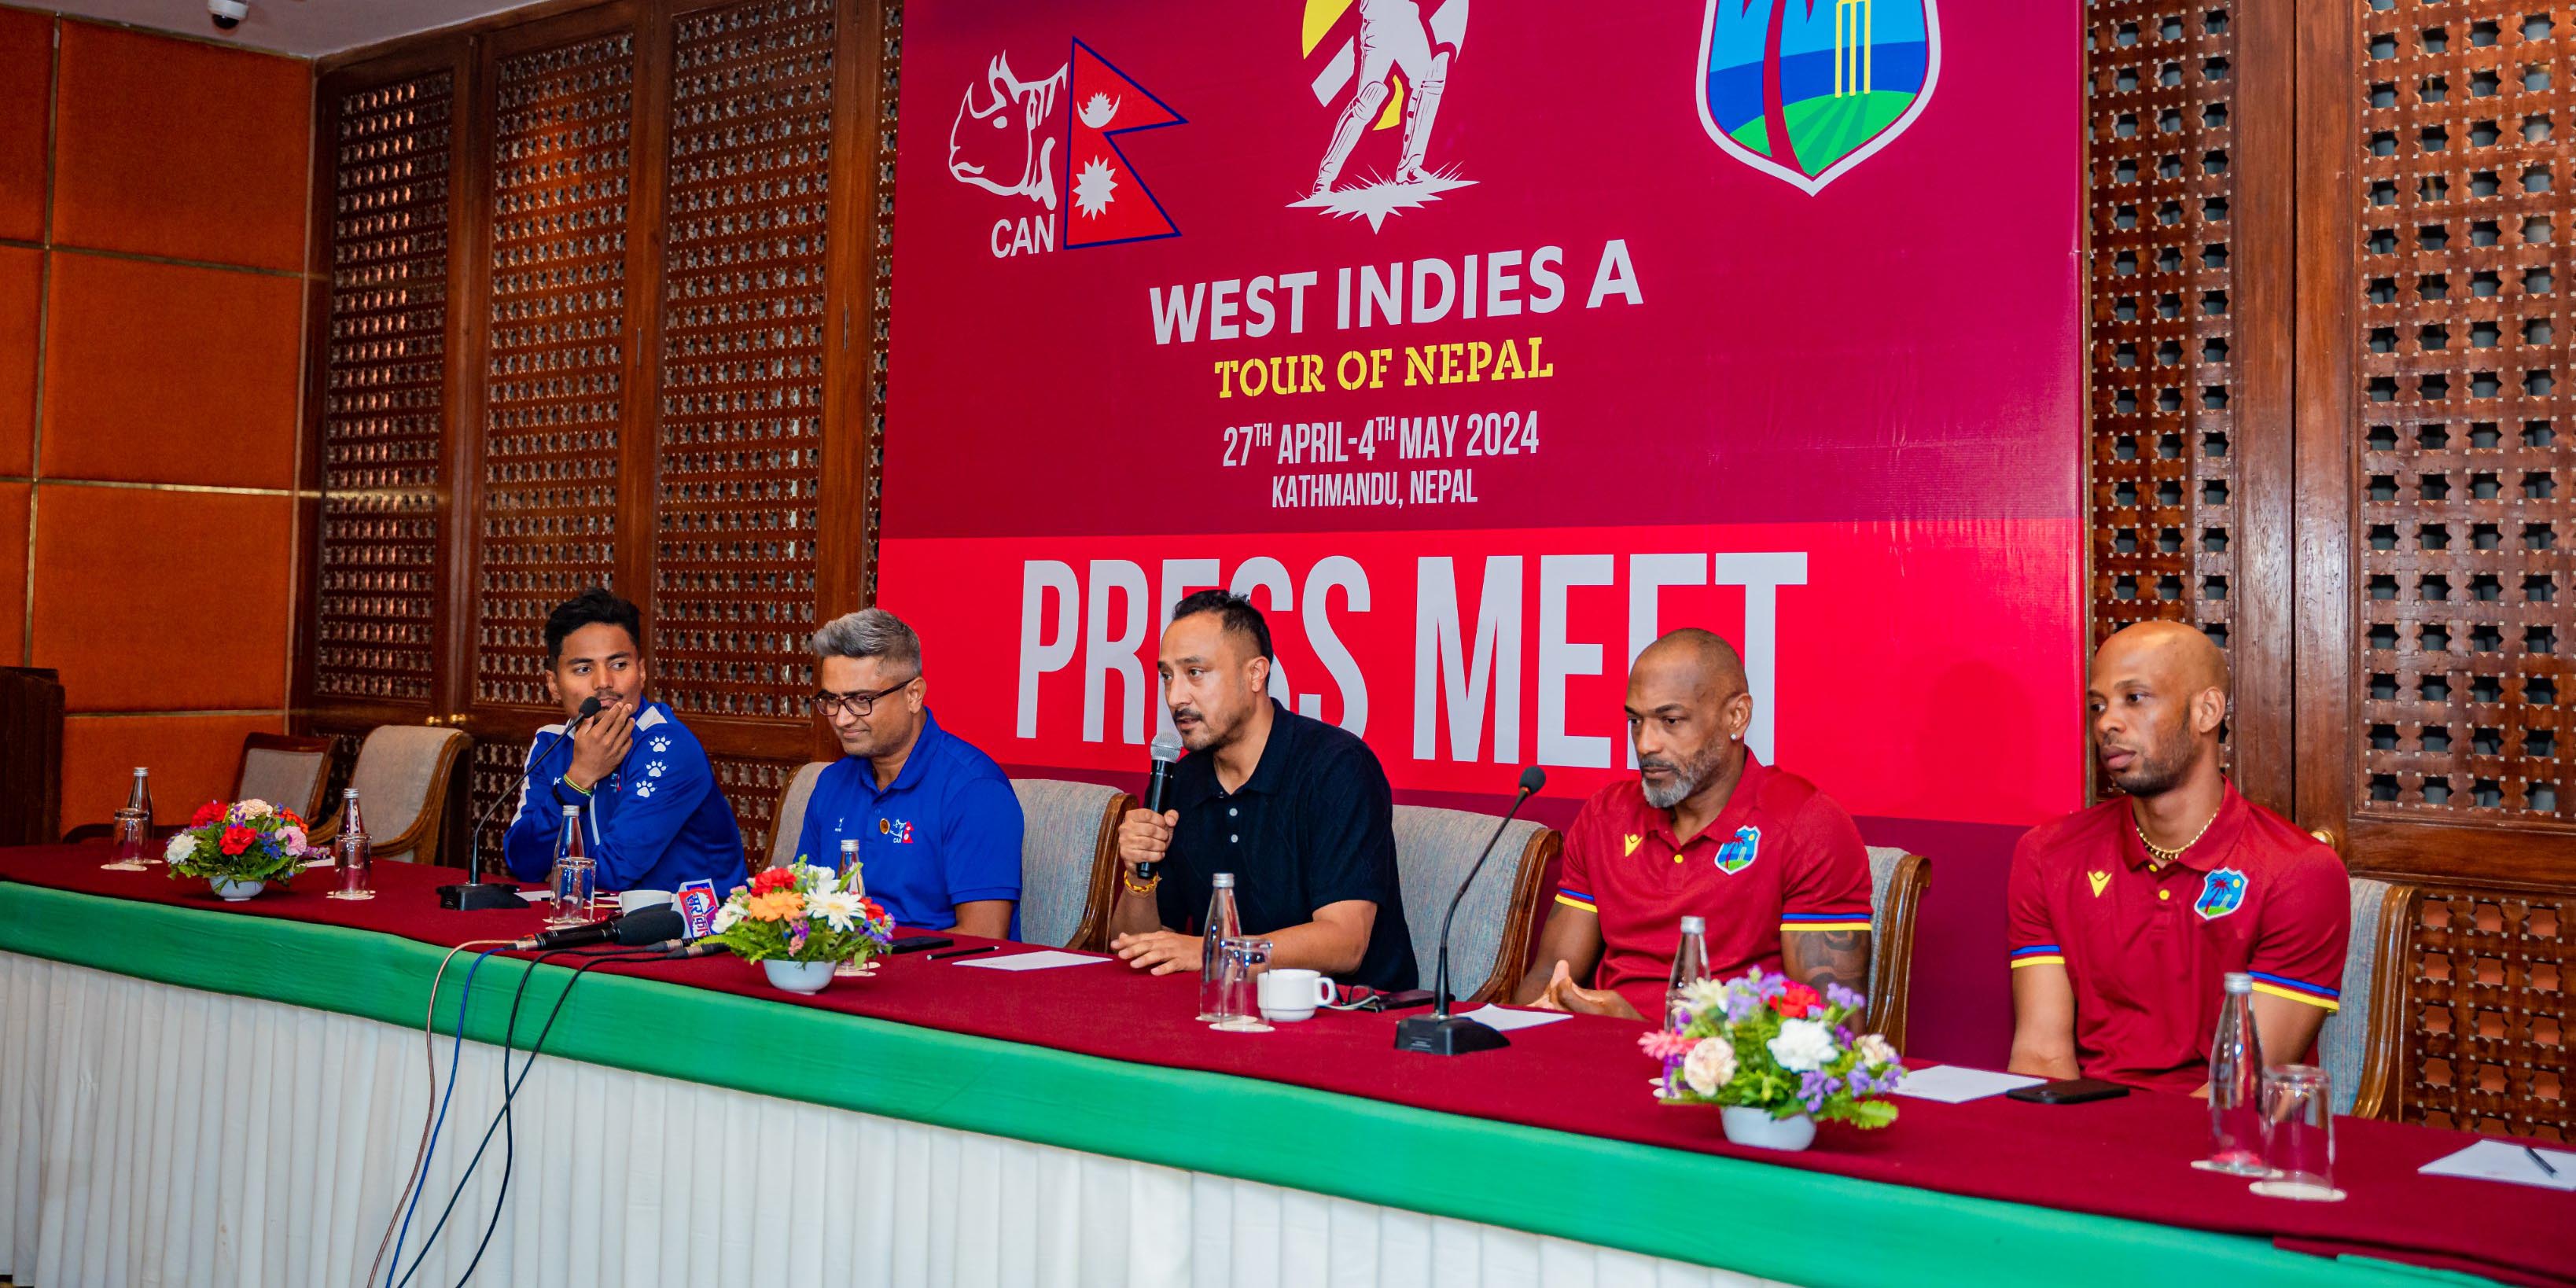 West Indies A series has opened doors for exciting cricketing ties: CAN